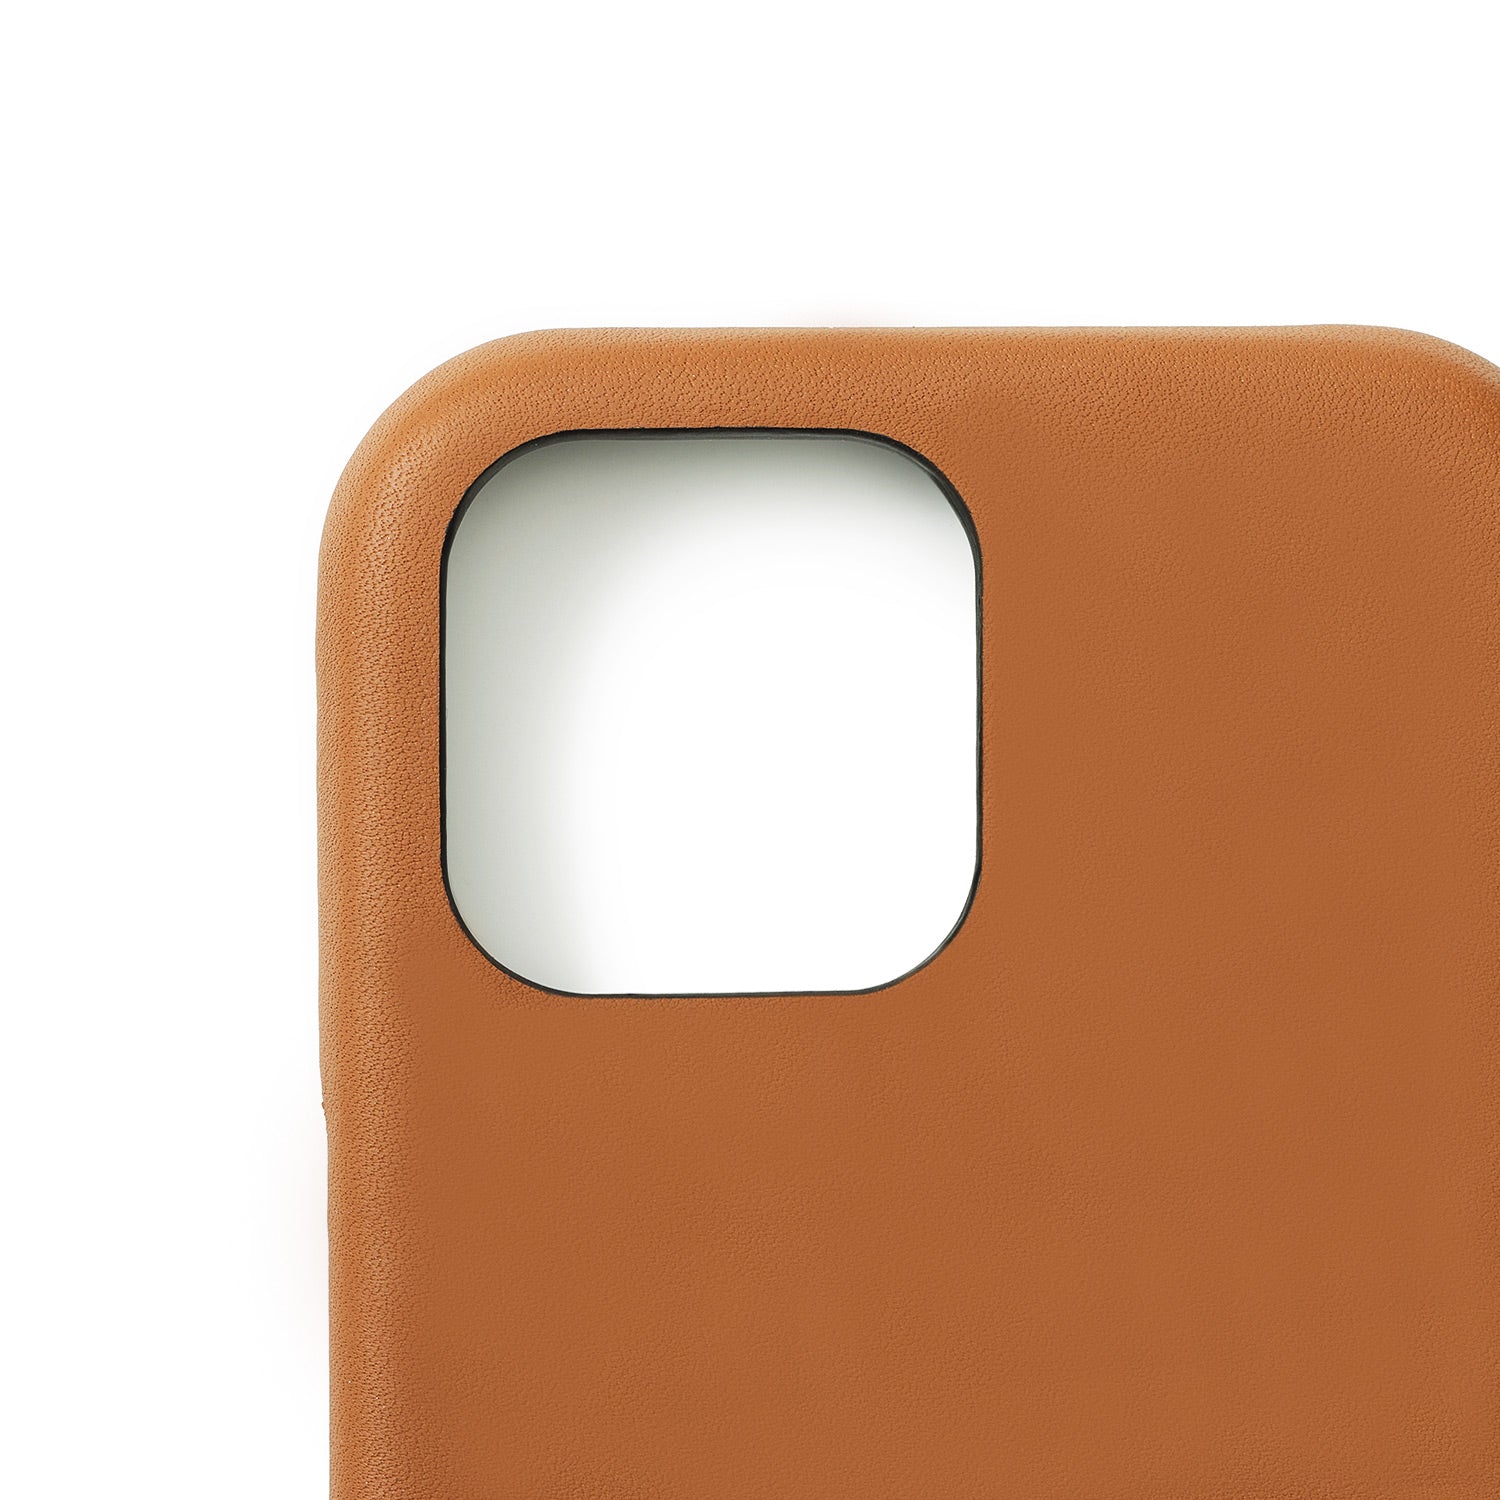 (iPhone 14) Back cover case smooth leather